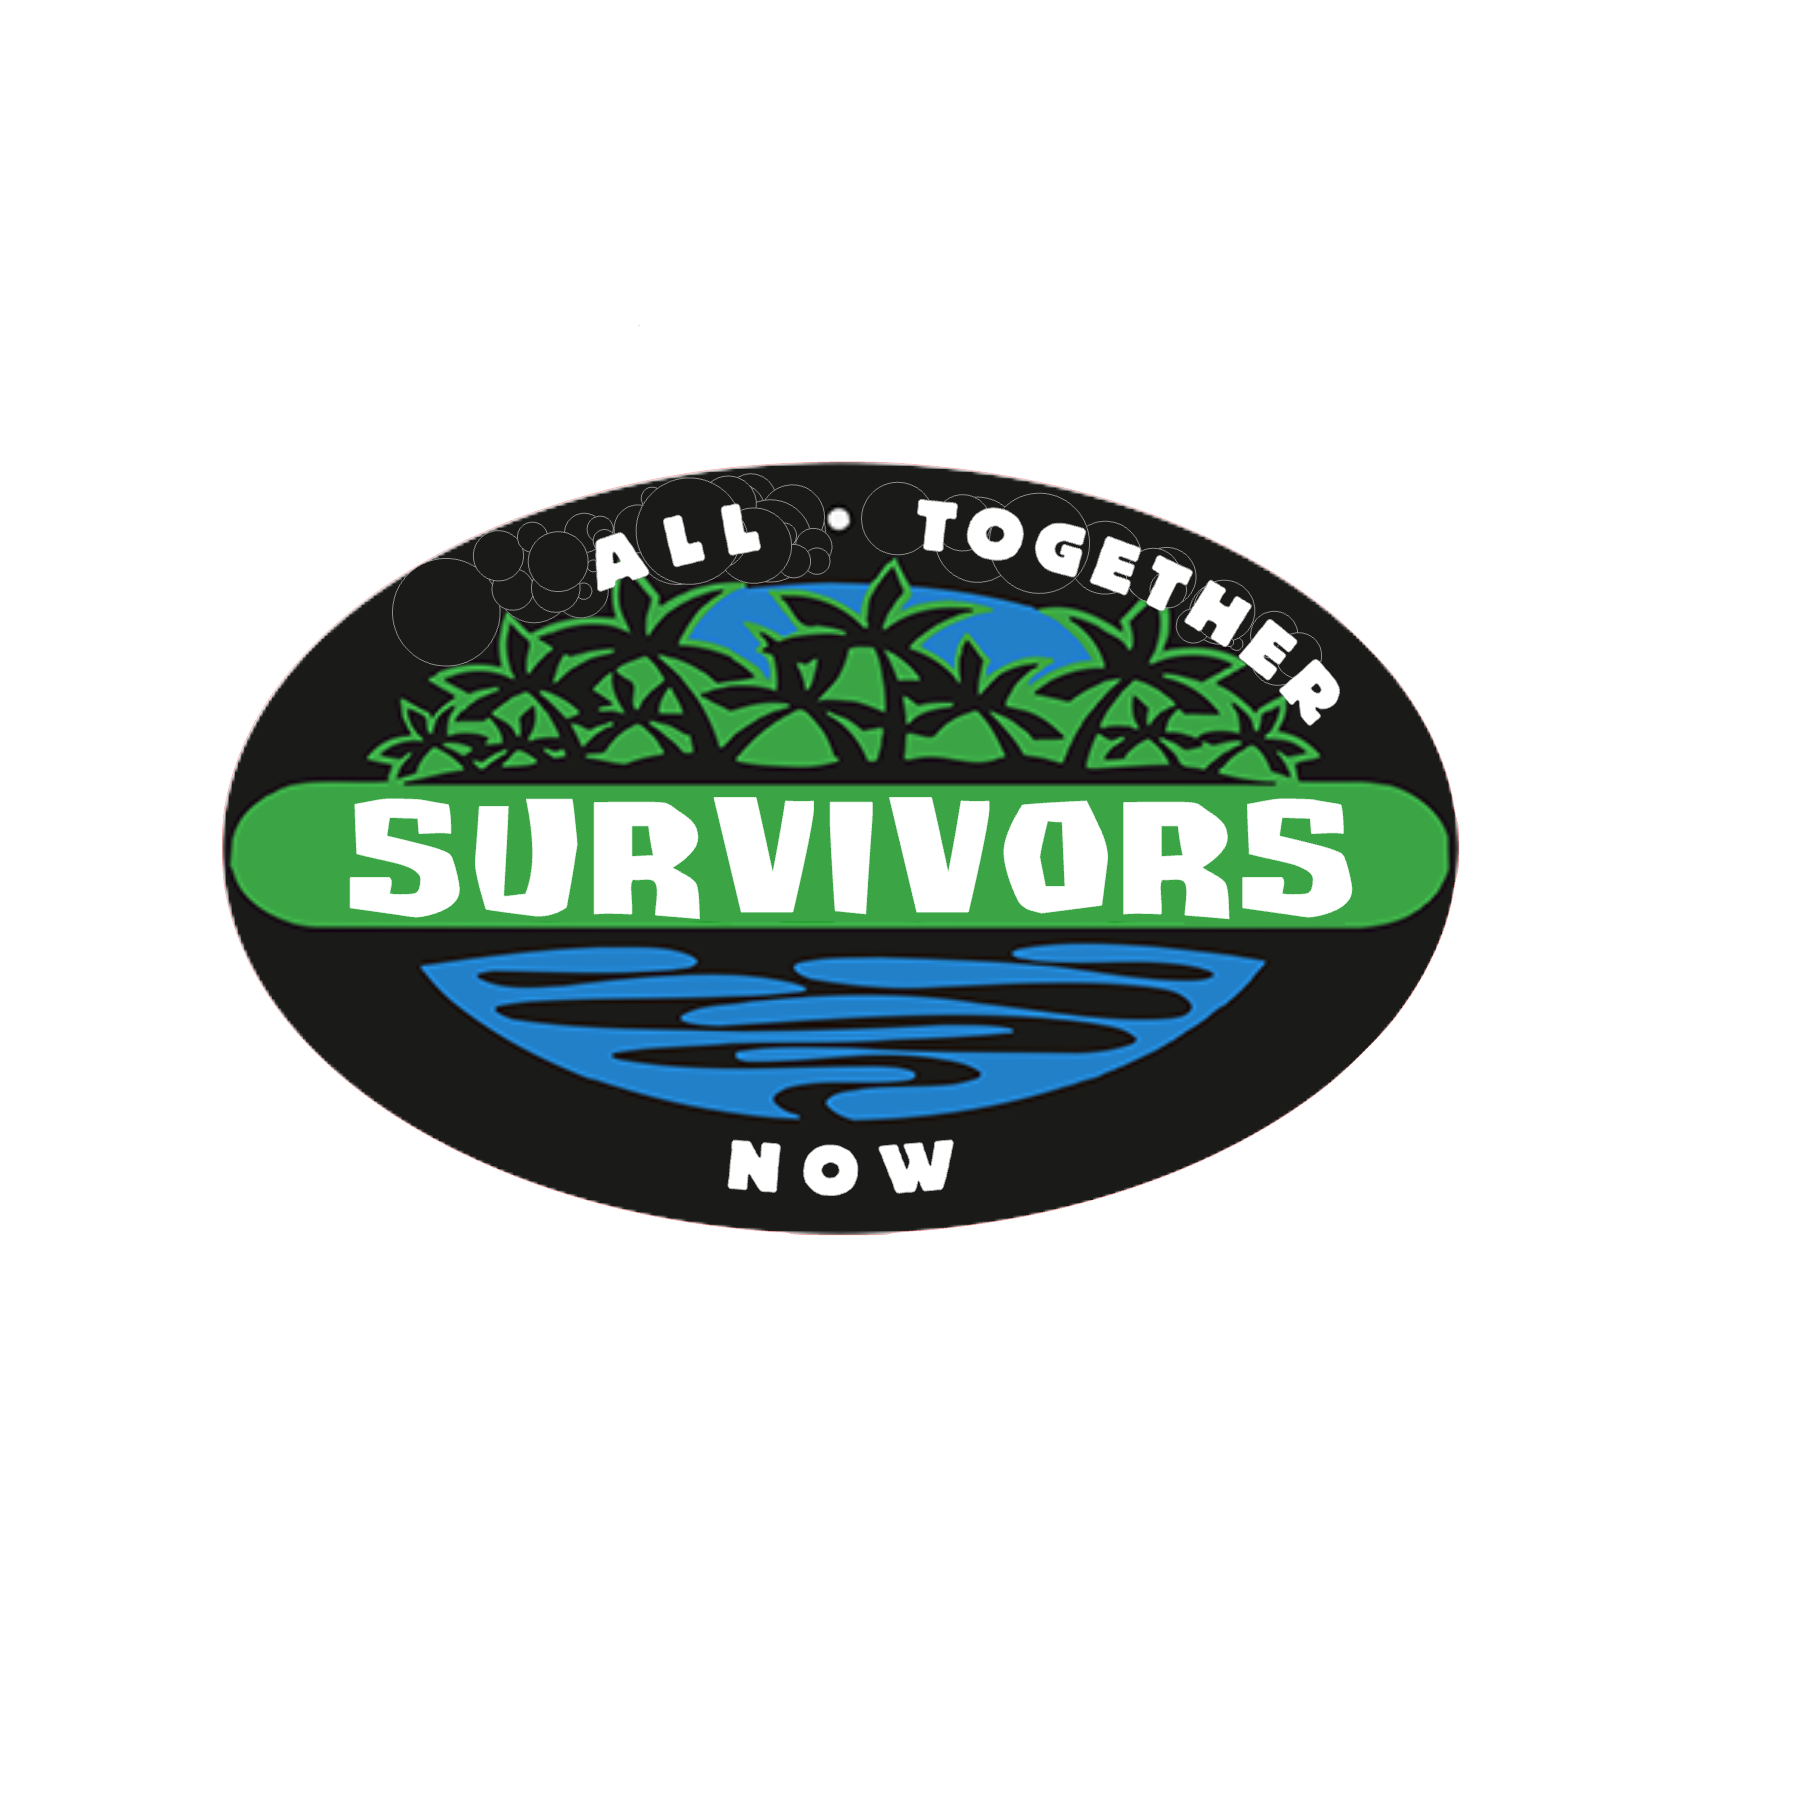 Survivors - All Together Now - Be Strong - Personal Safety